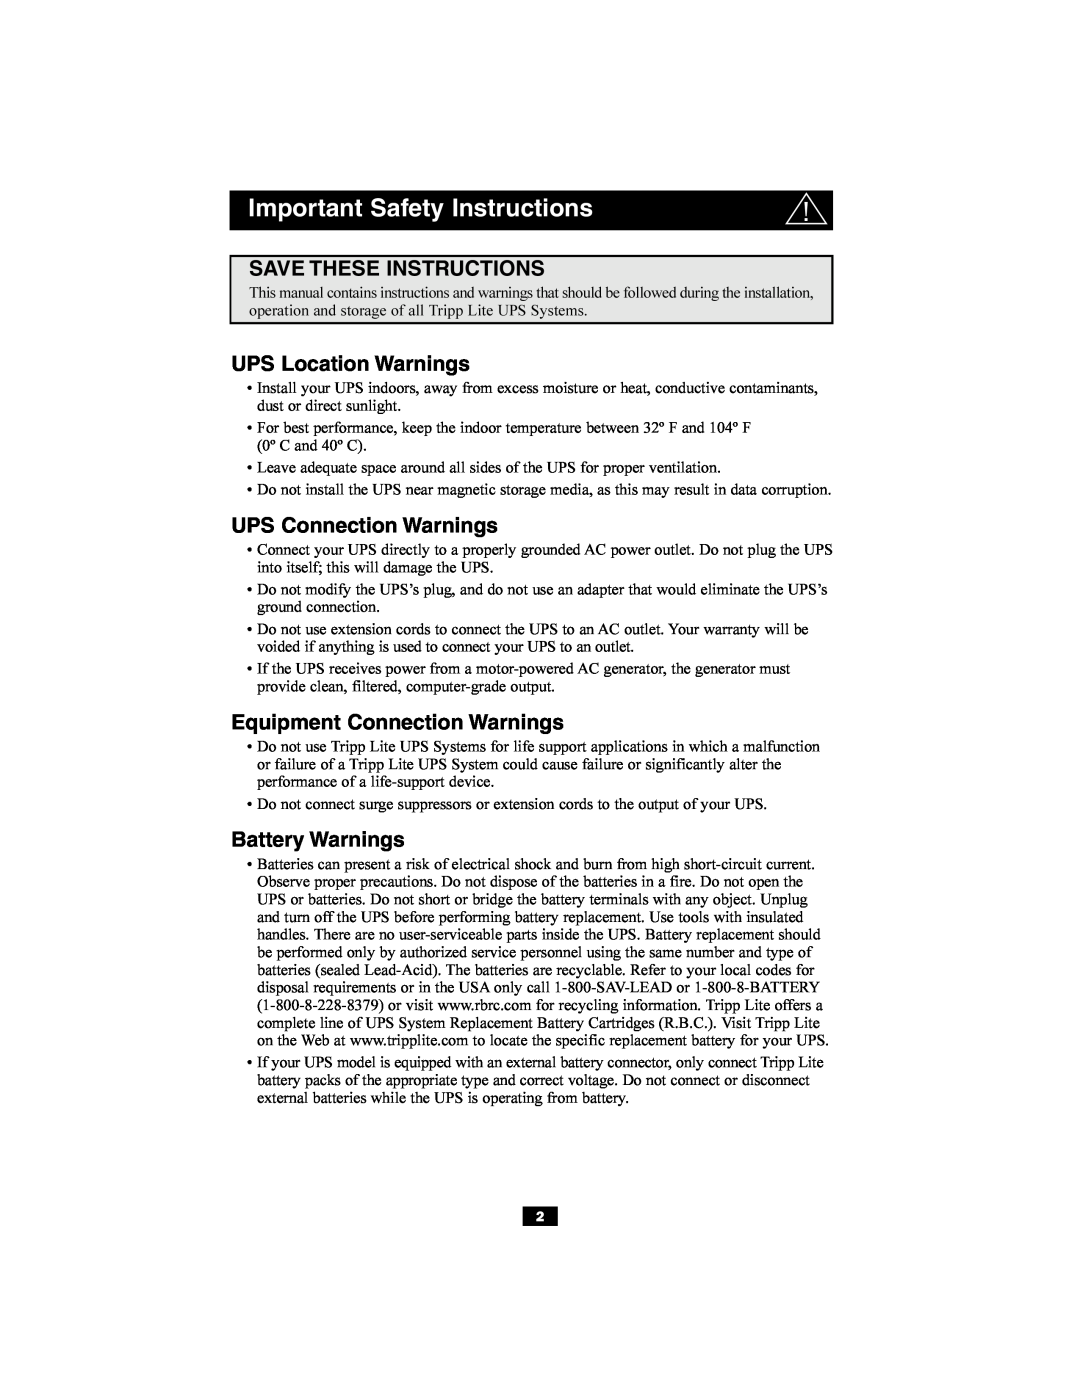 Tripp Lite SMARTINT3000VS Important Safety Instructions, Save These Instructions, UPS Location Warnings, Battery Warnings 